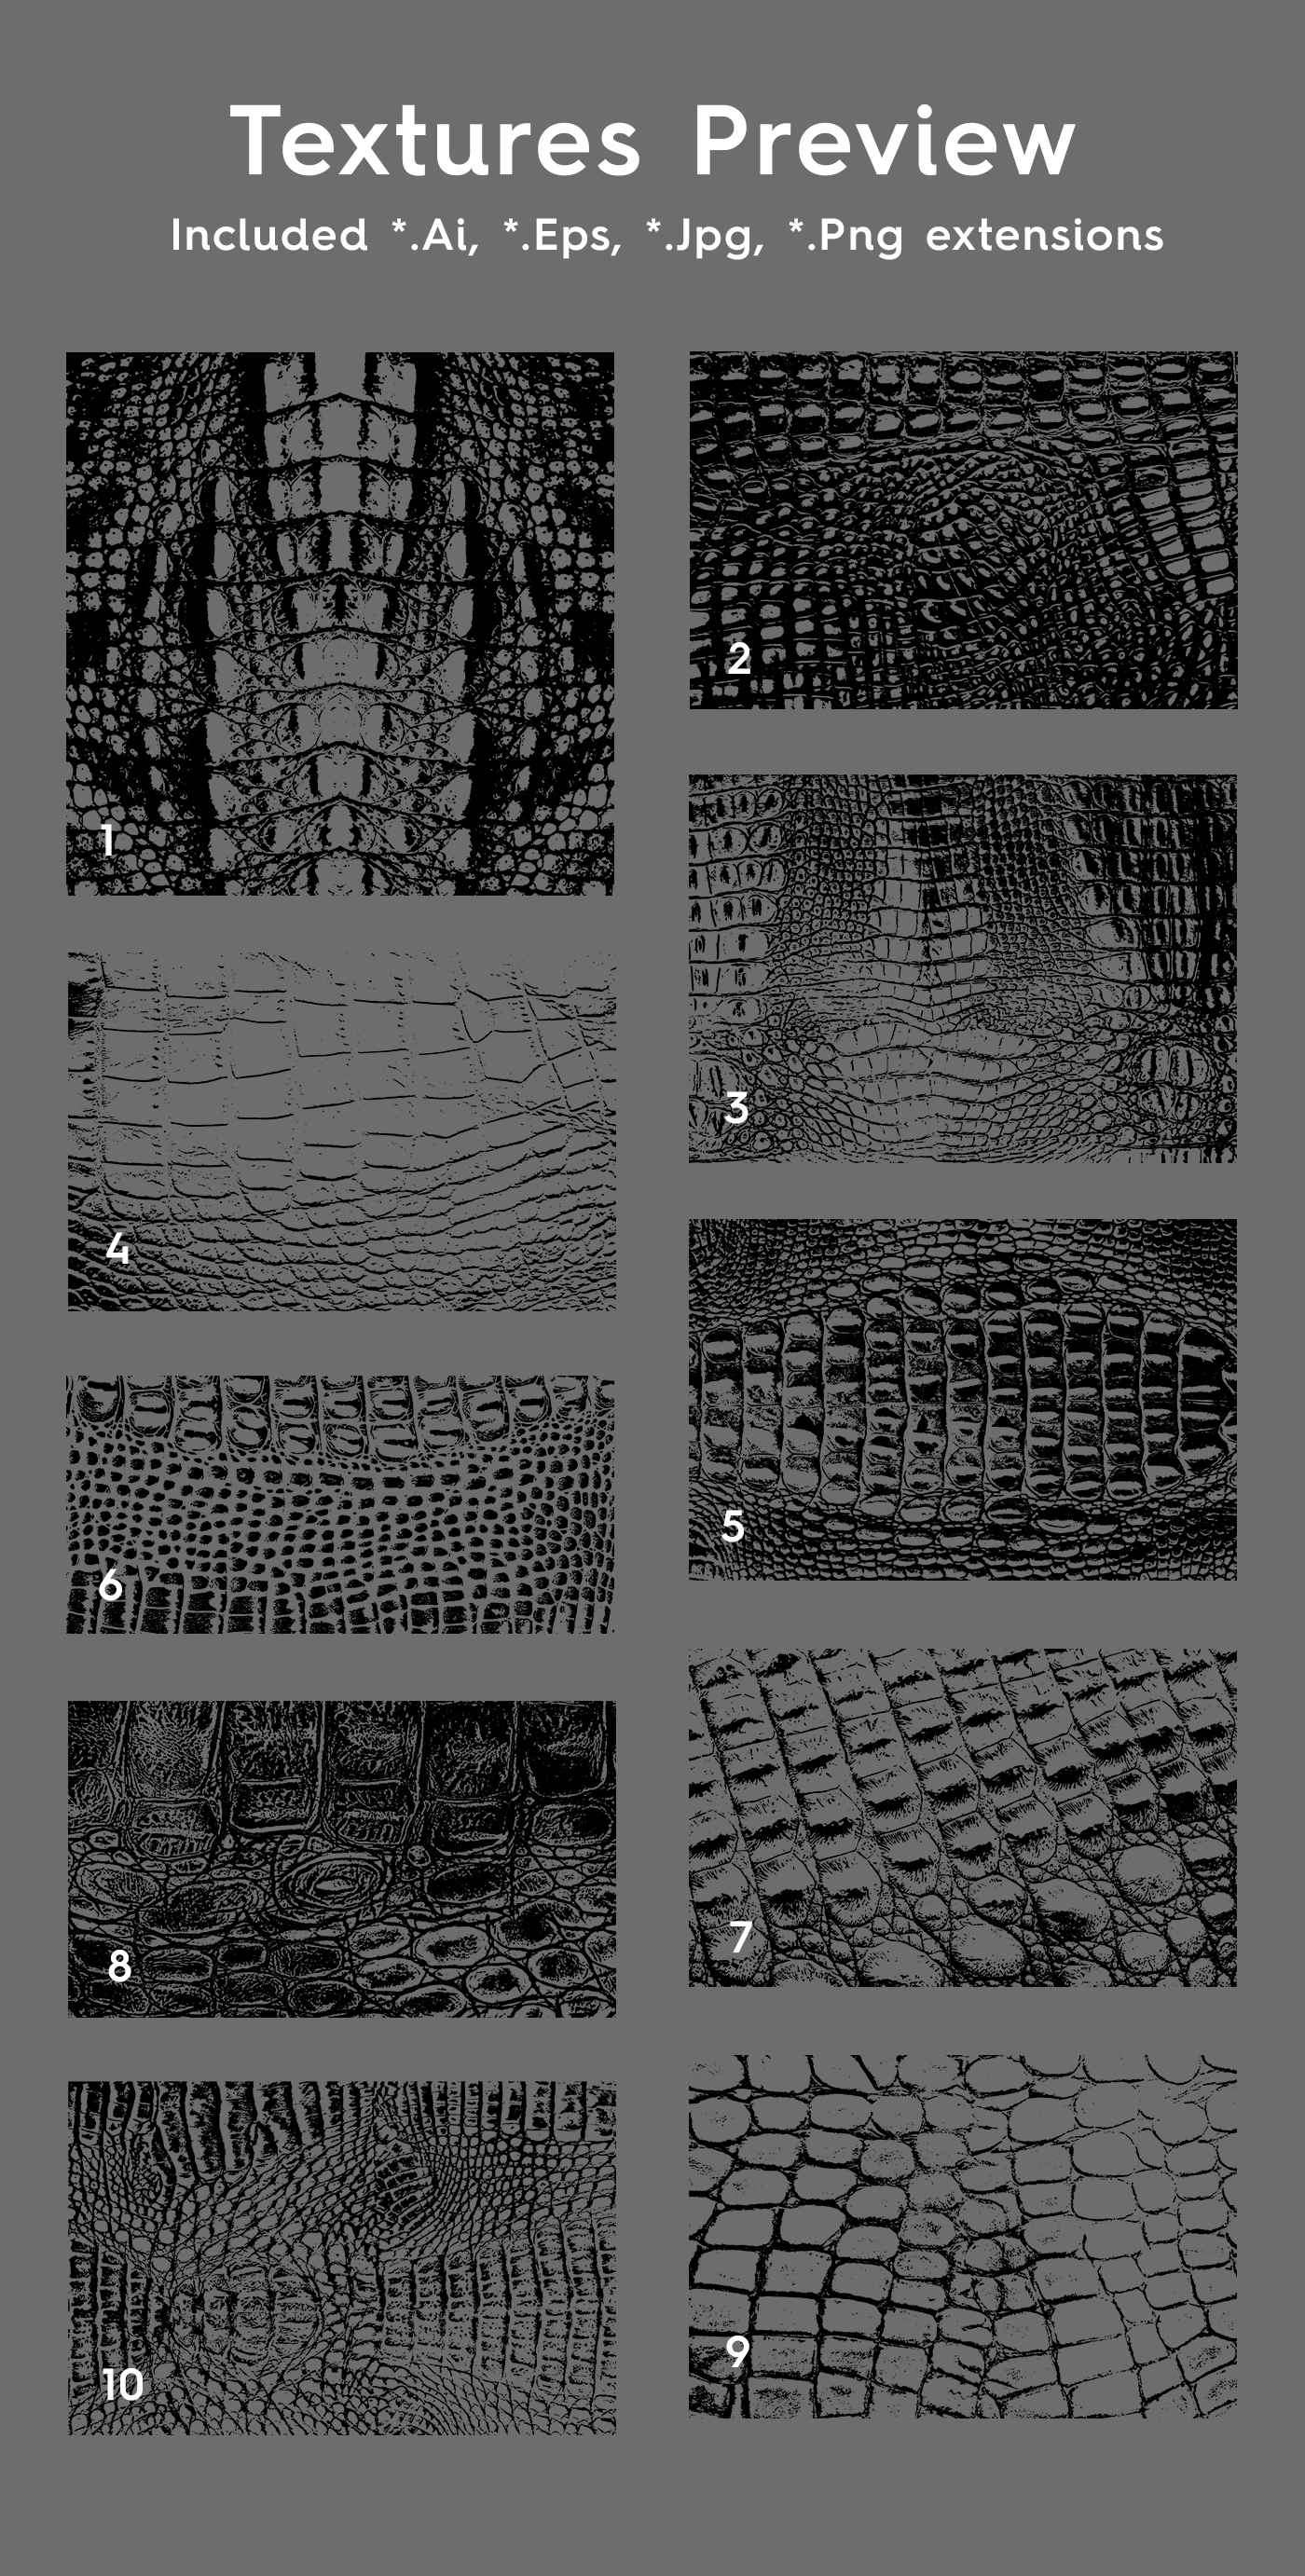 crocodile reptile skin leather texture background Overlay vector EPS png